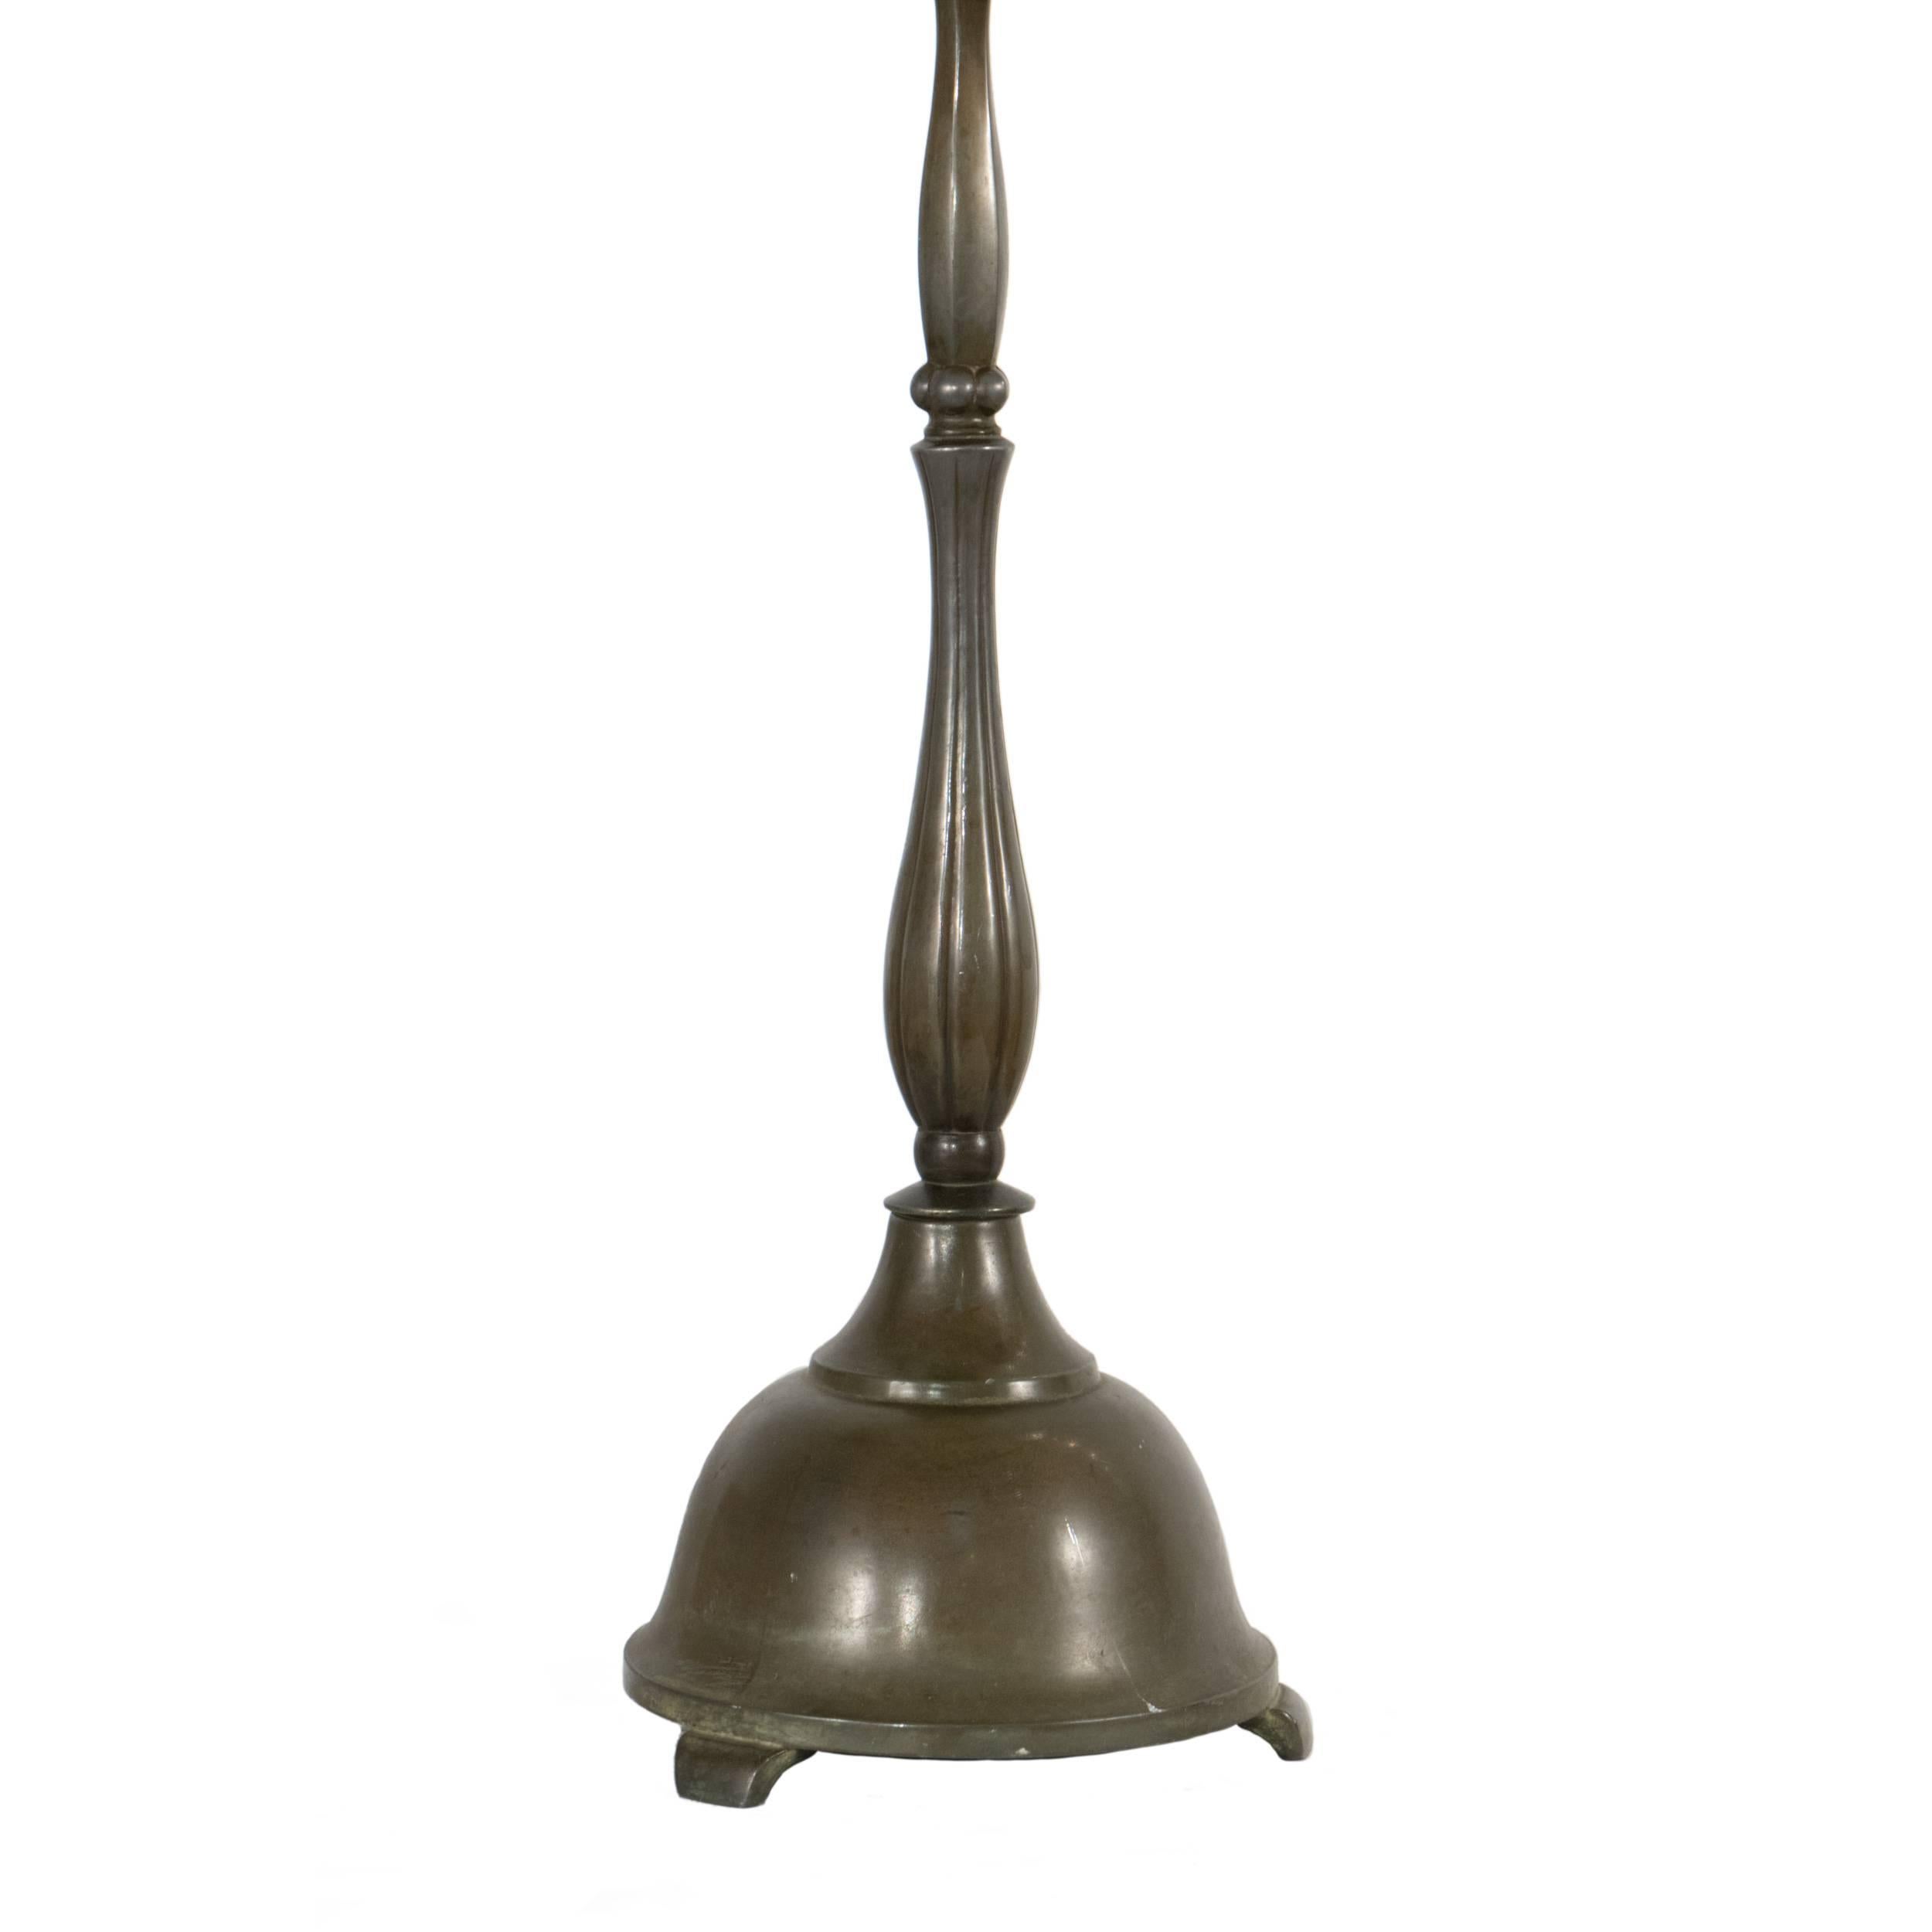 Table lamp in bronze by Just Andersen.